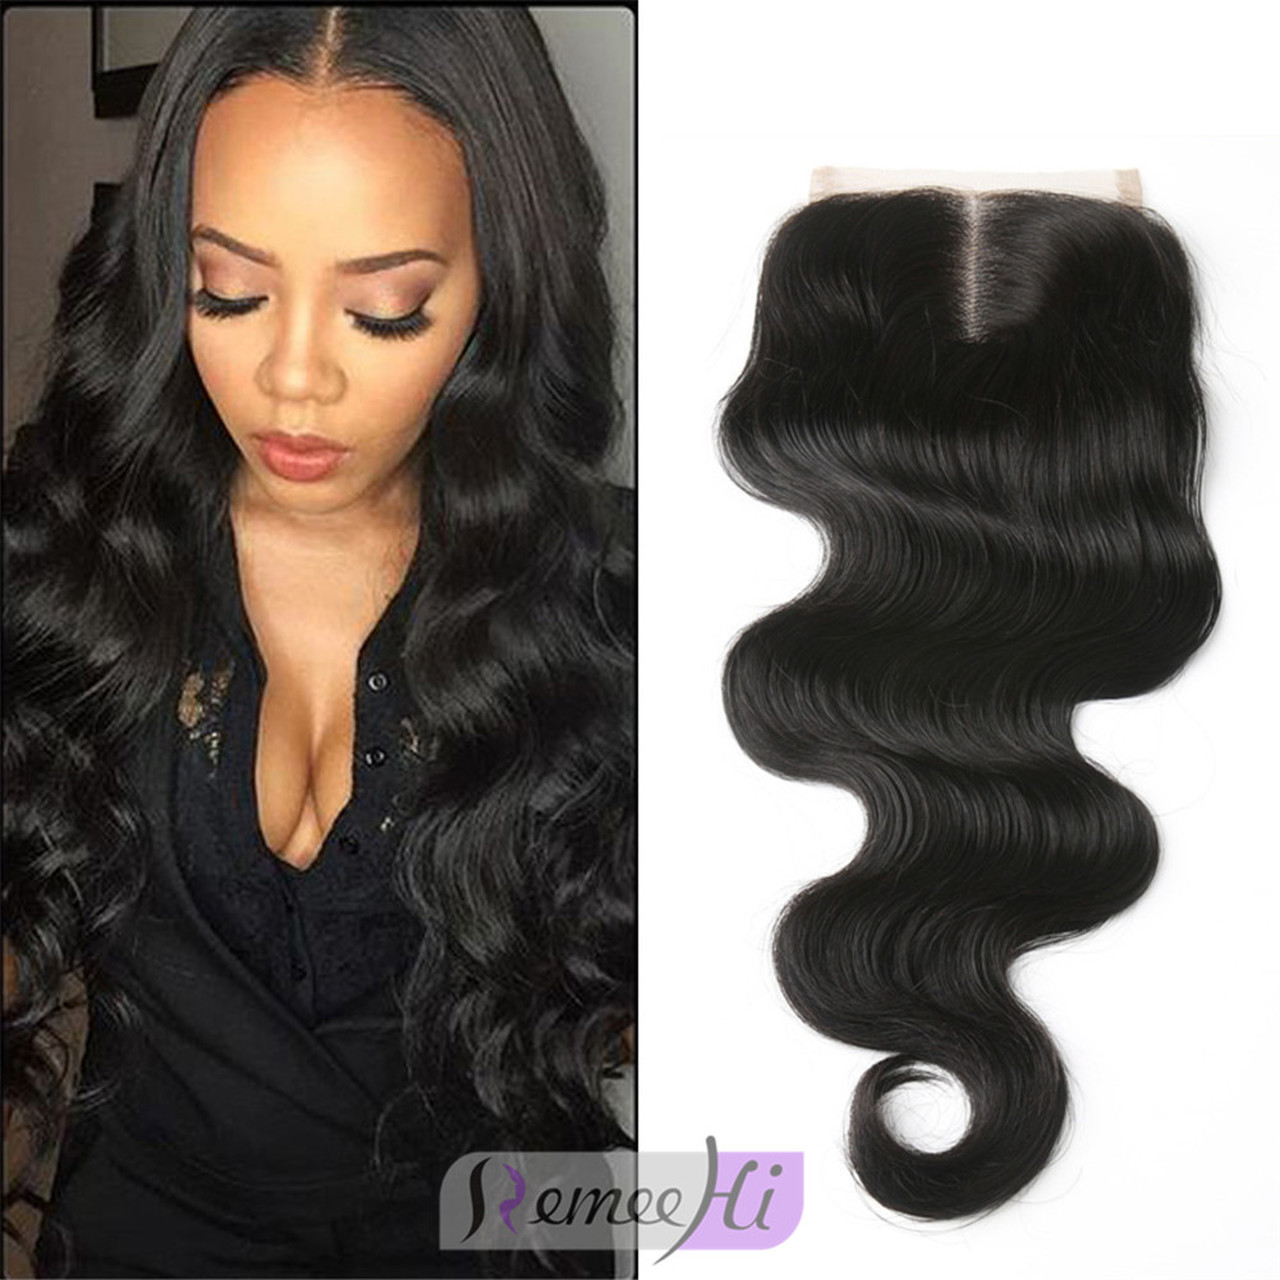 Remeehi Brazilian remy Hair Body Wave Lace Closure 100% Unprocessed Human Hair Closure Free Middle 3 Part Closure Bleached Knots